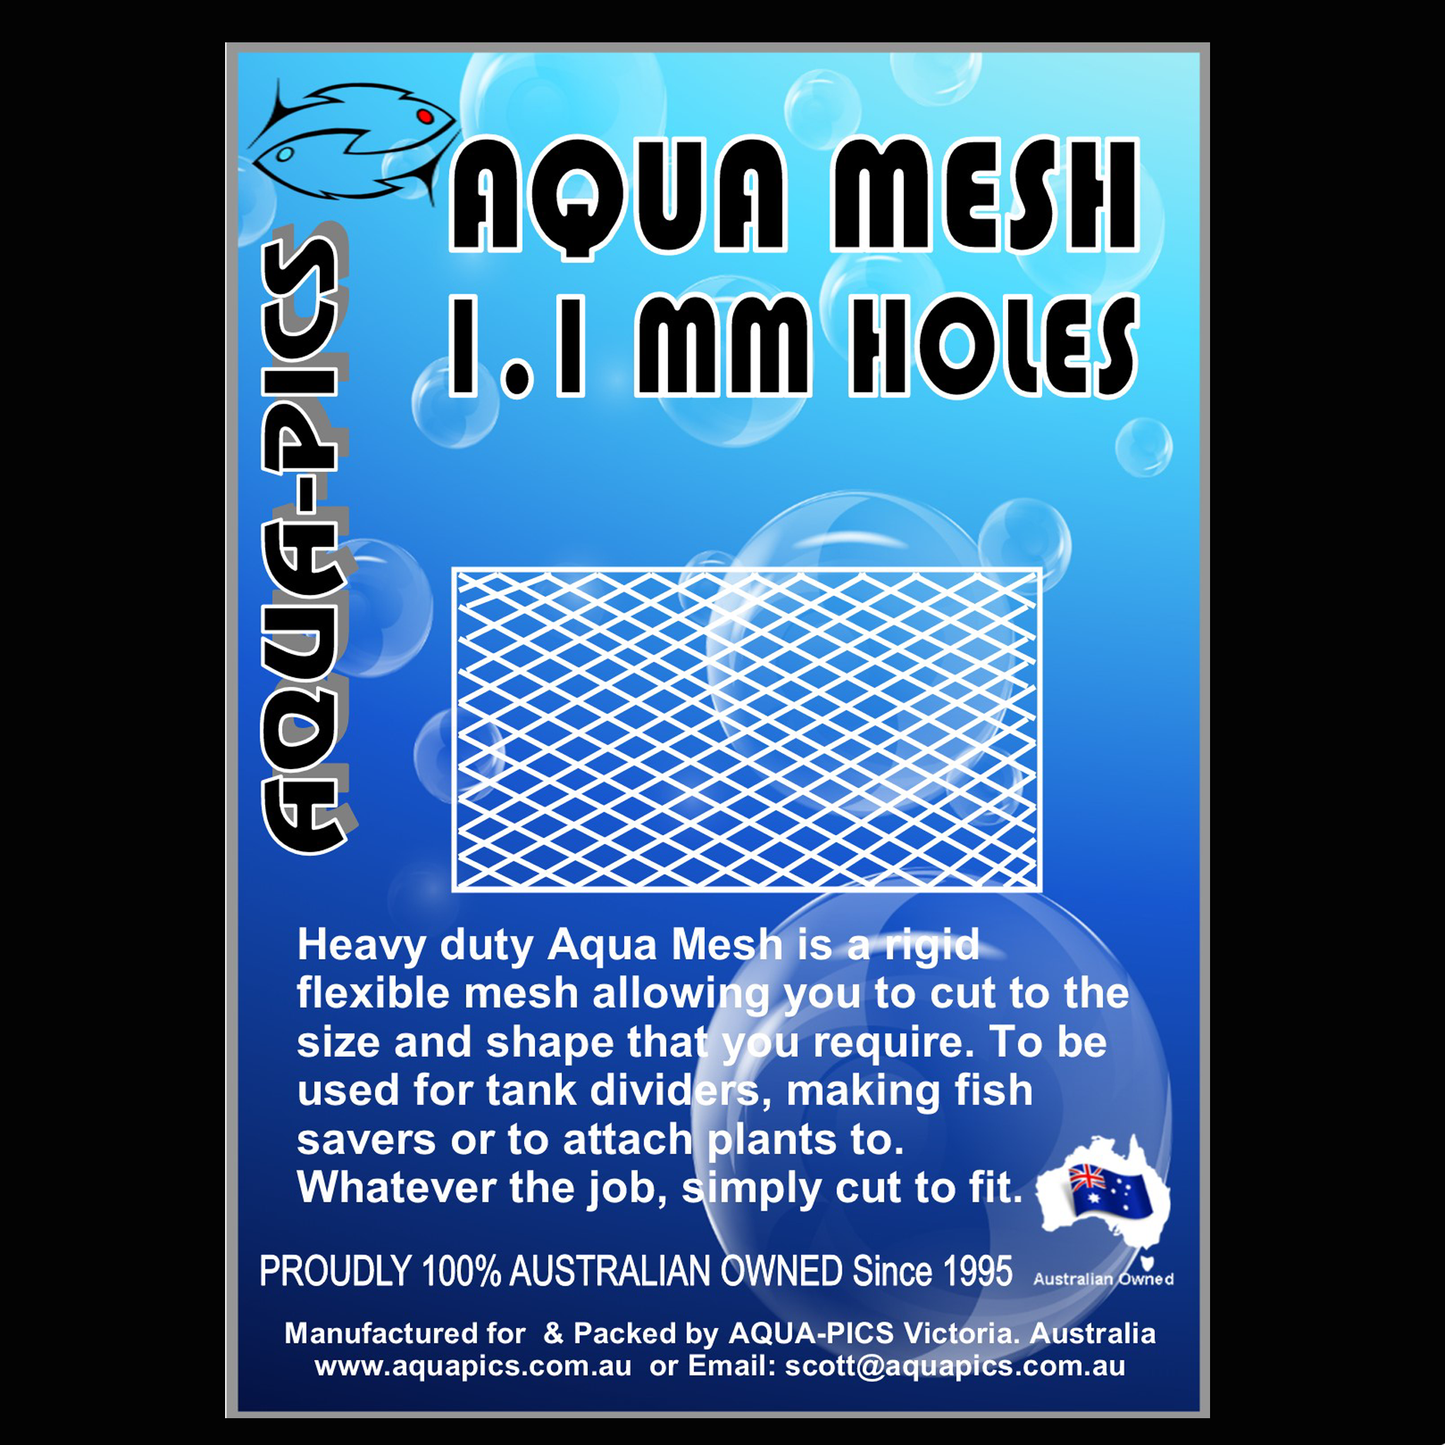 Aqua Mesh 1.1mm holes For tank dividers & plant supports